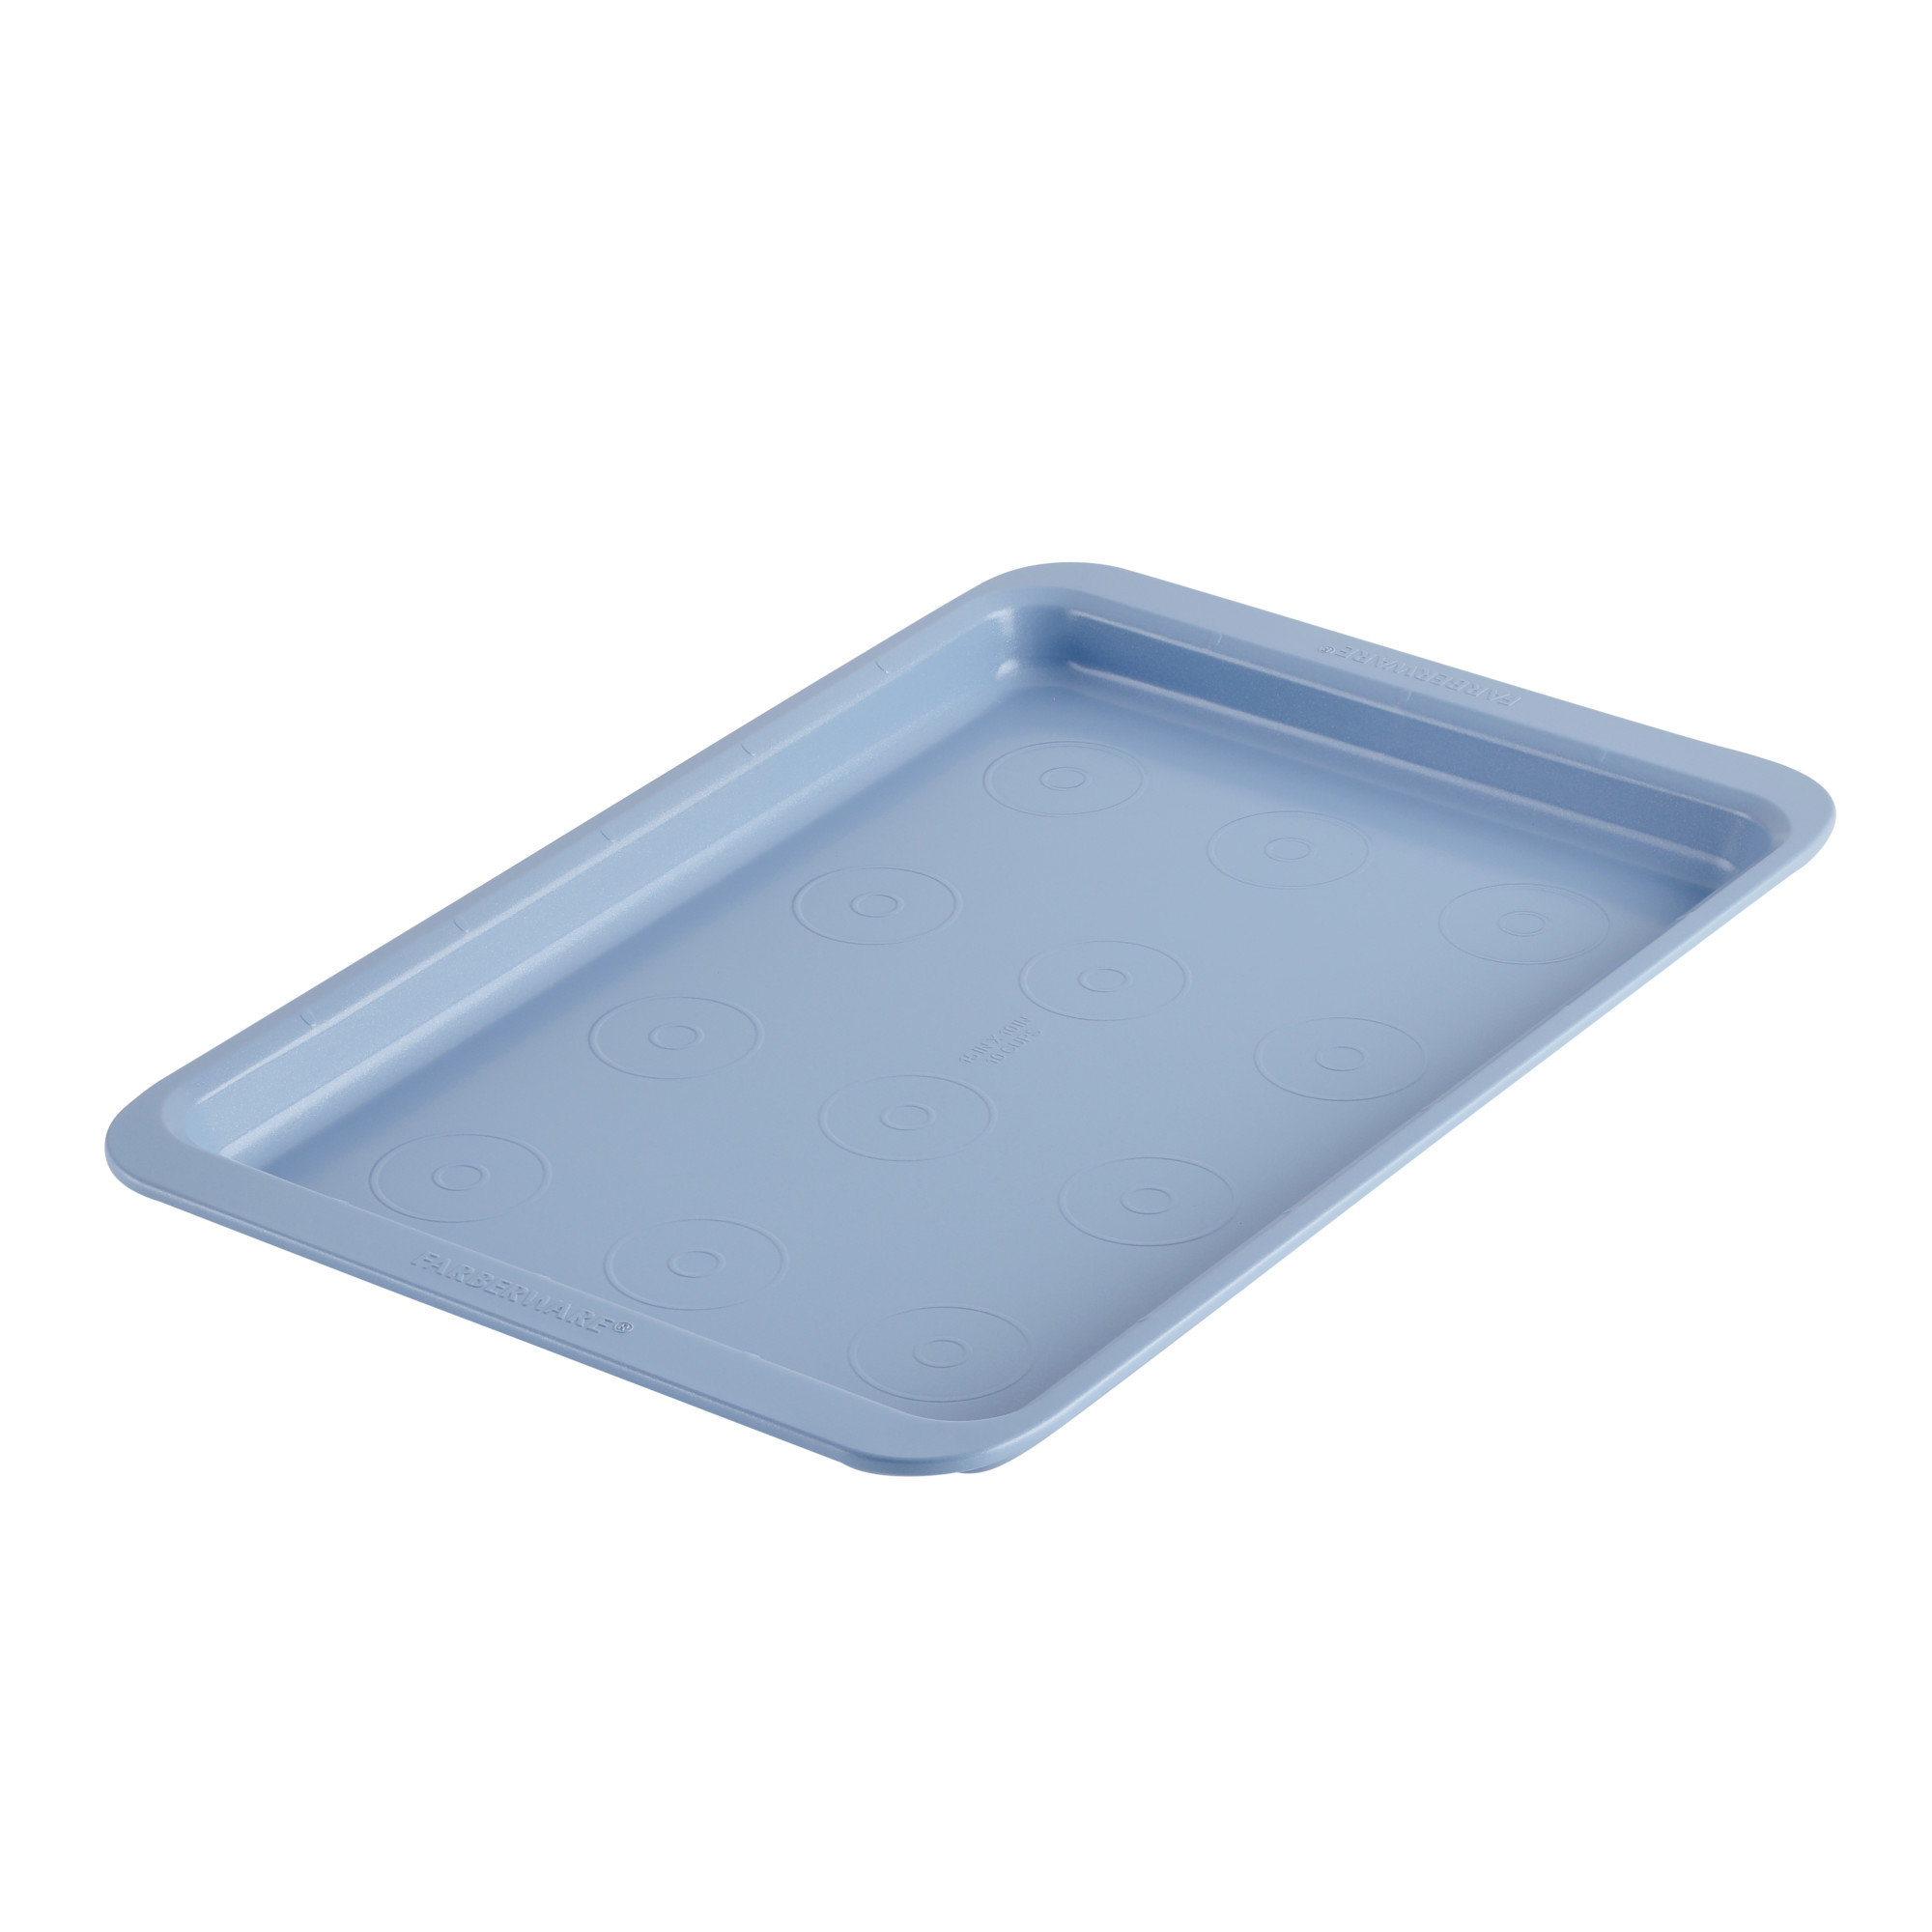 Farberware Easy Solutions Nonstick Bakeware Sheet Pan And 12-Cup Muffin Pan  Set, 2-Piece, Blue